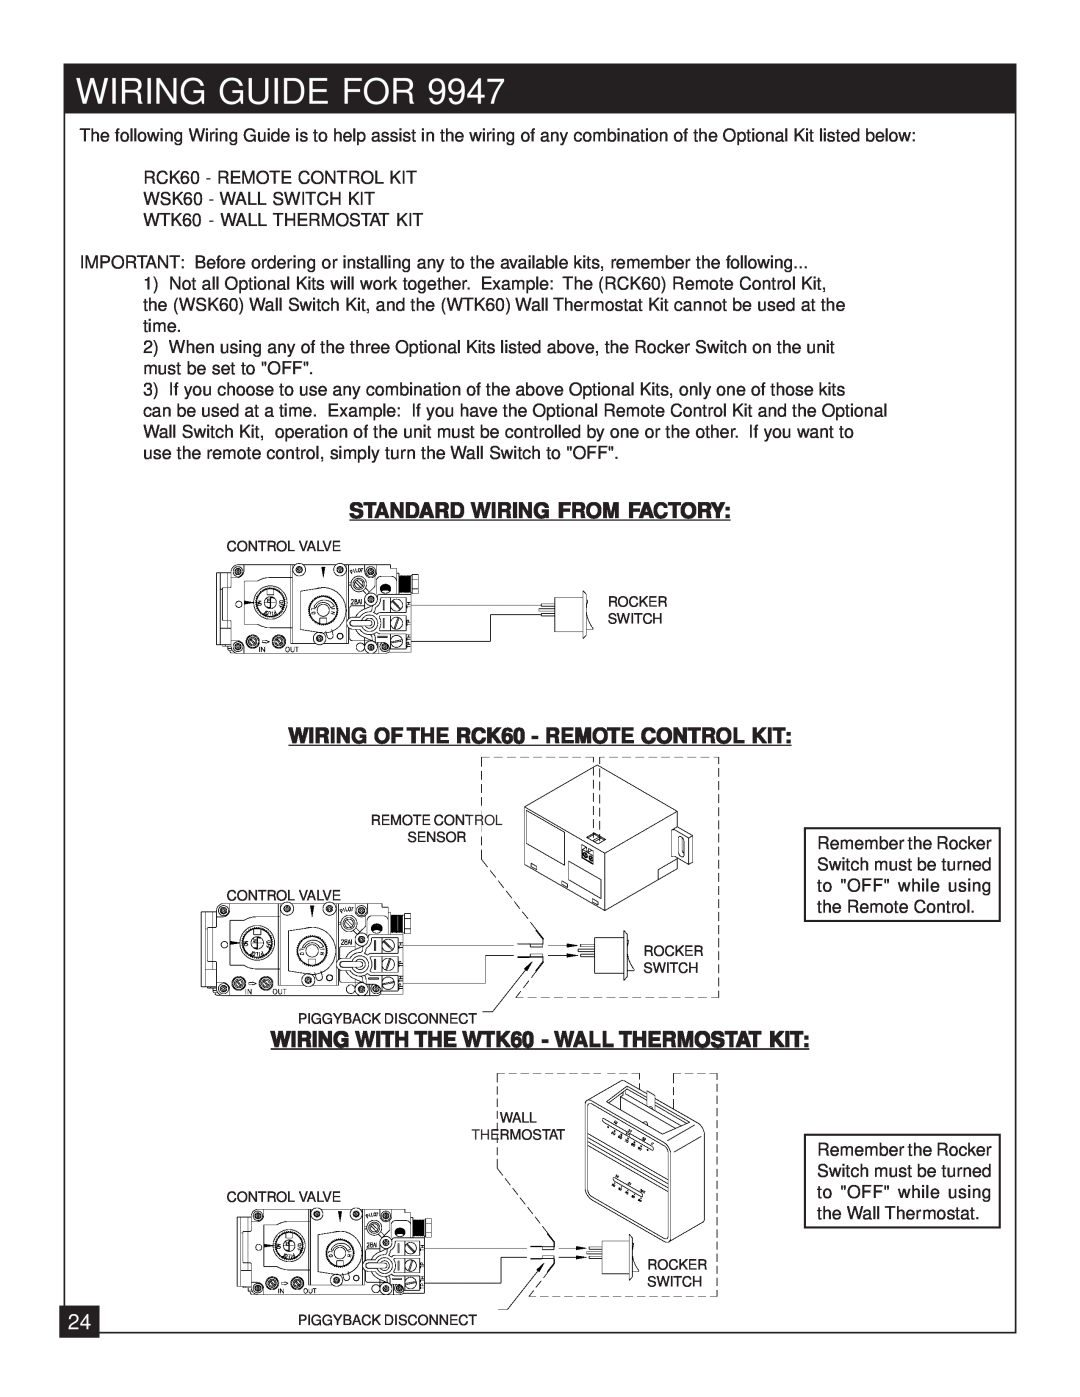 United States Stove 9947 Wiring Guide For, Standard Wiring From Factory, WIRING OF THE RCK60 - REMOTE CONTROL KIT 